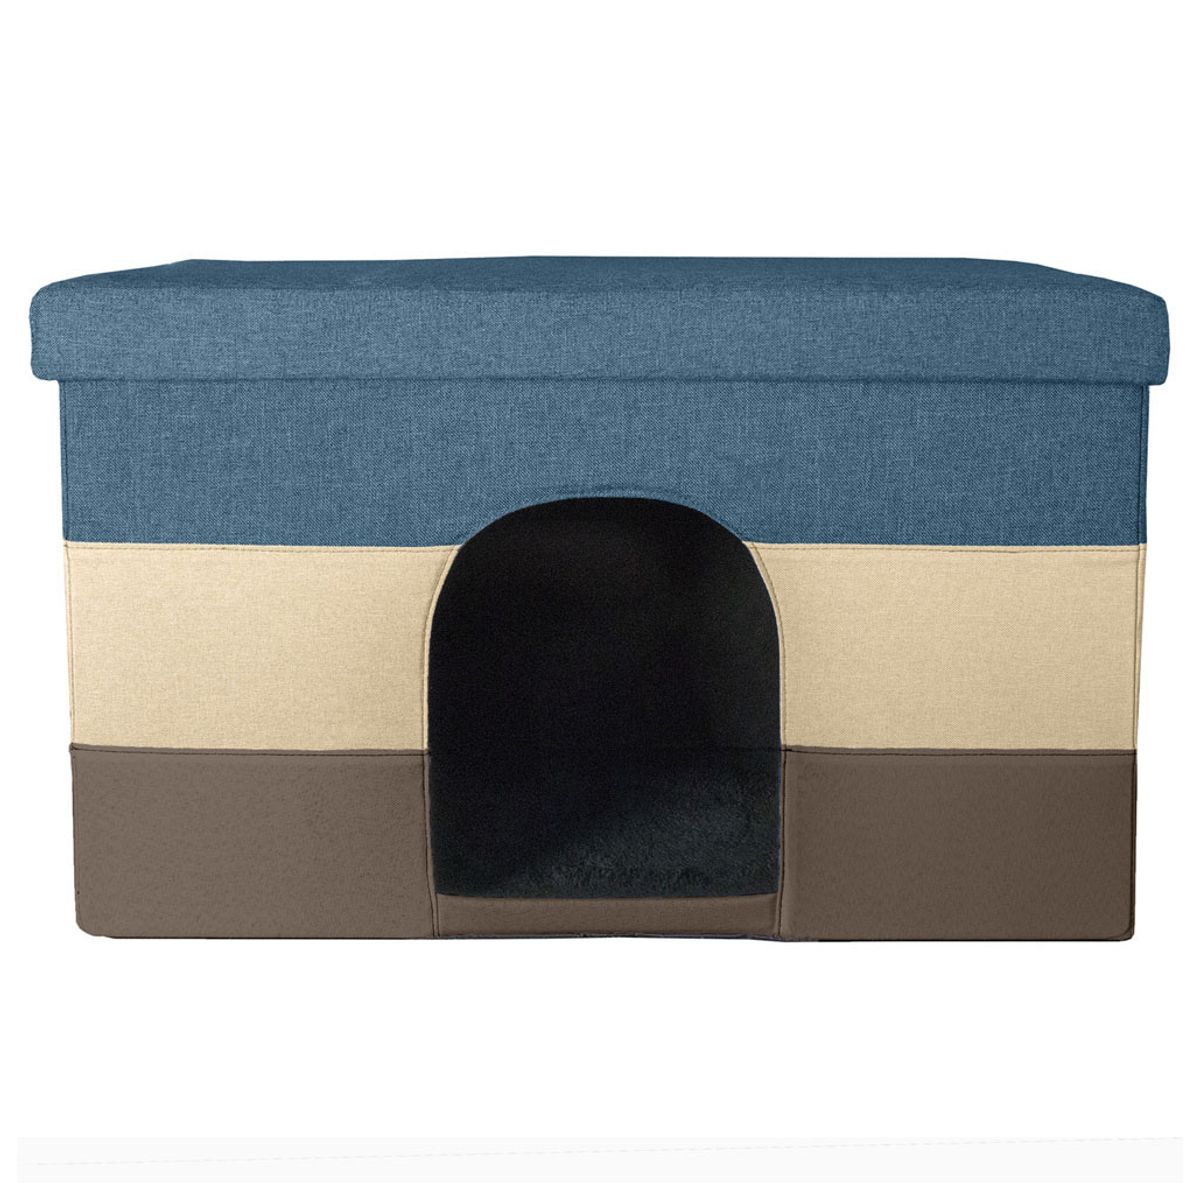 Photos - Bed & Furniture FurHaven Pet House Footstool Ottoman - Small - Beach House Stripe 5426329 